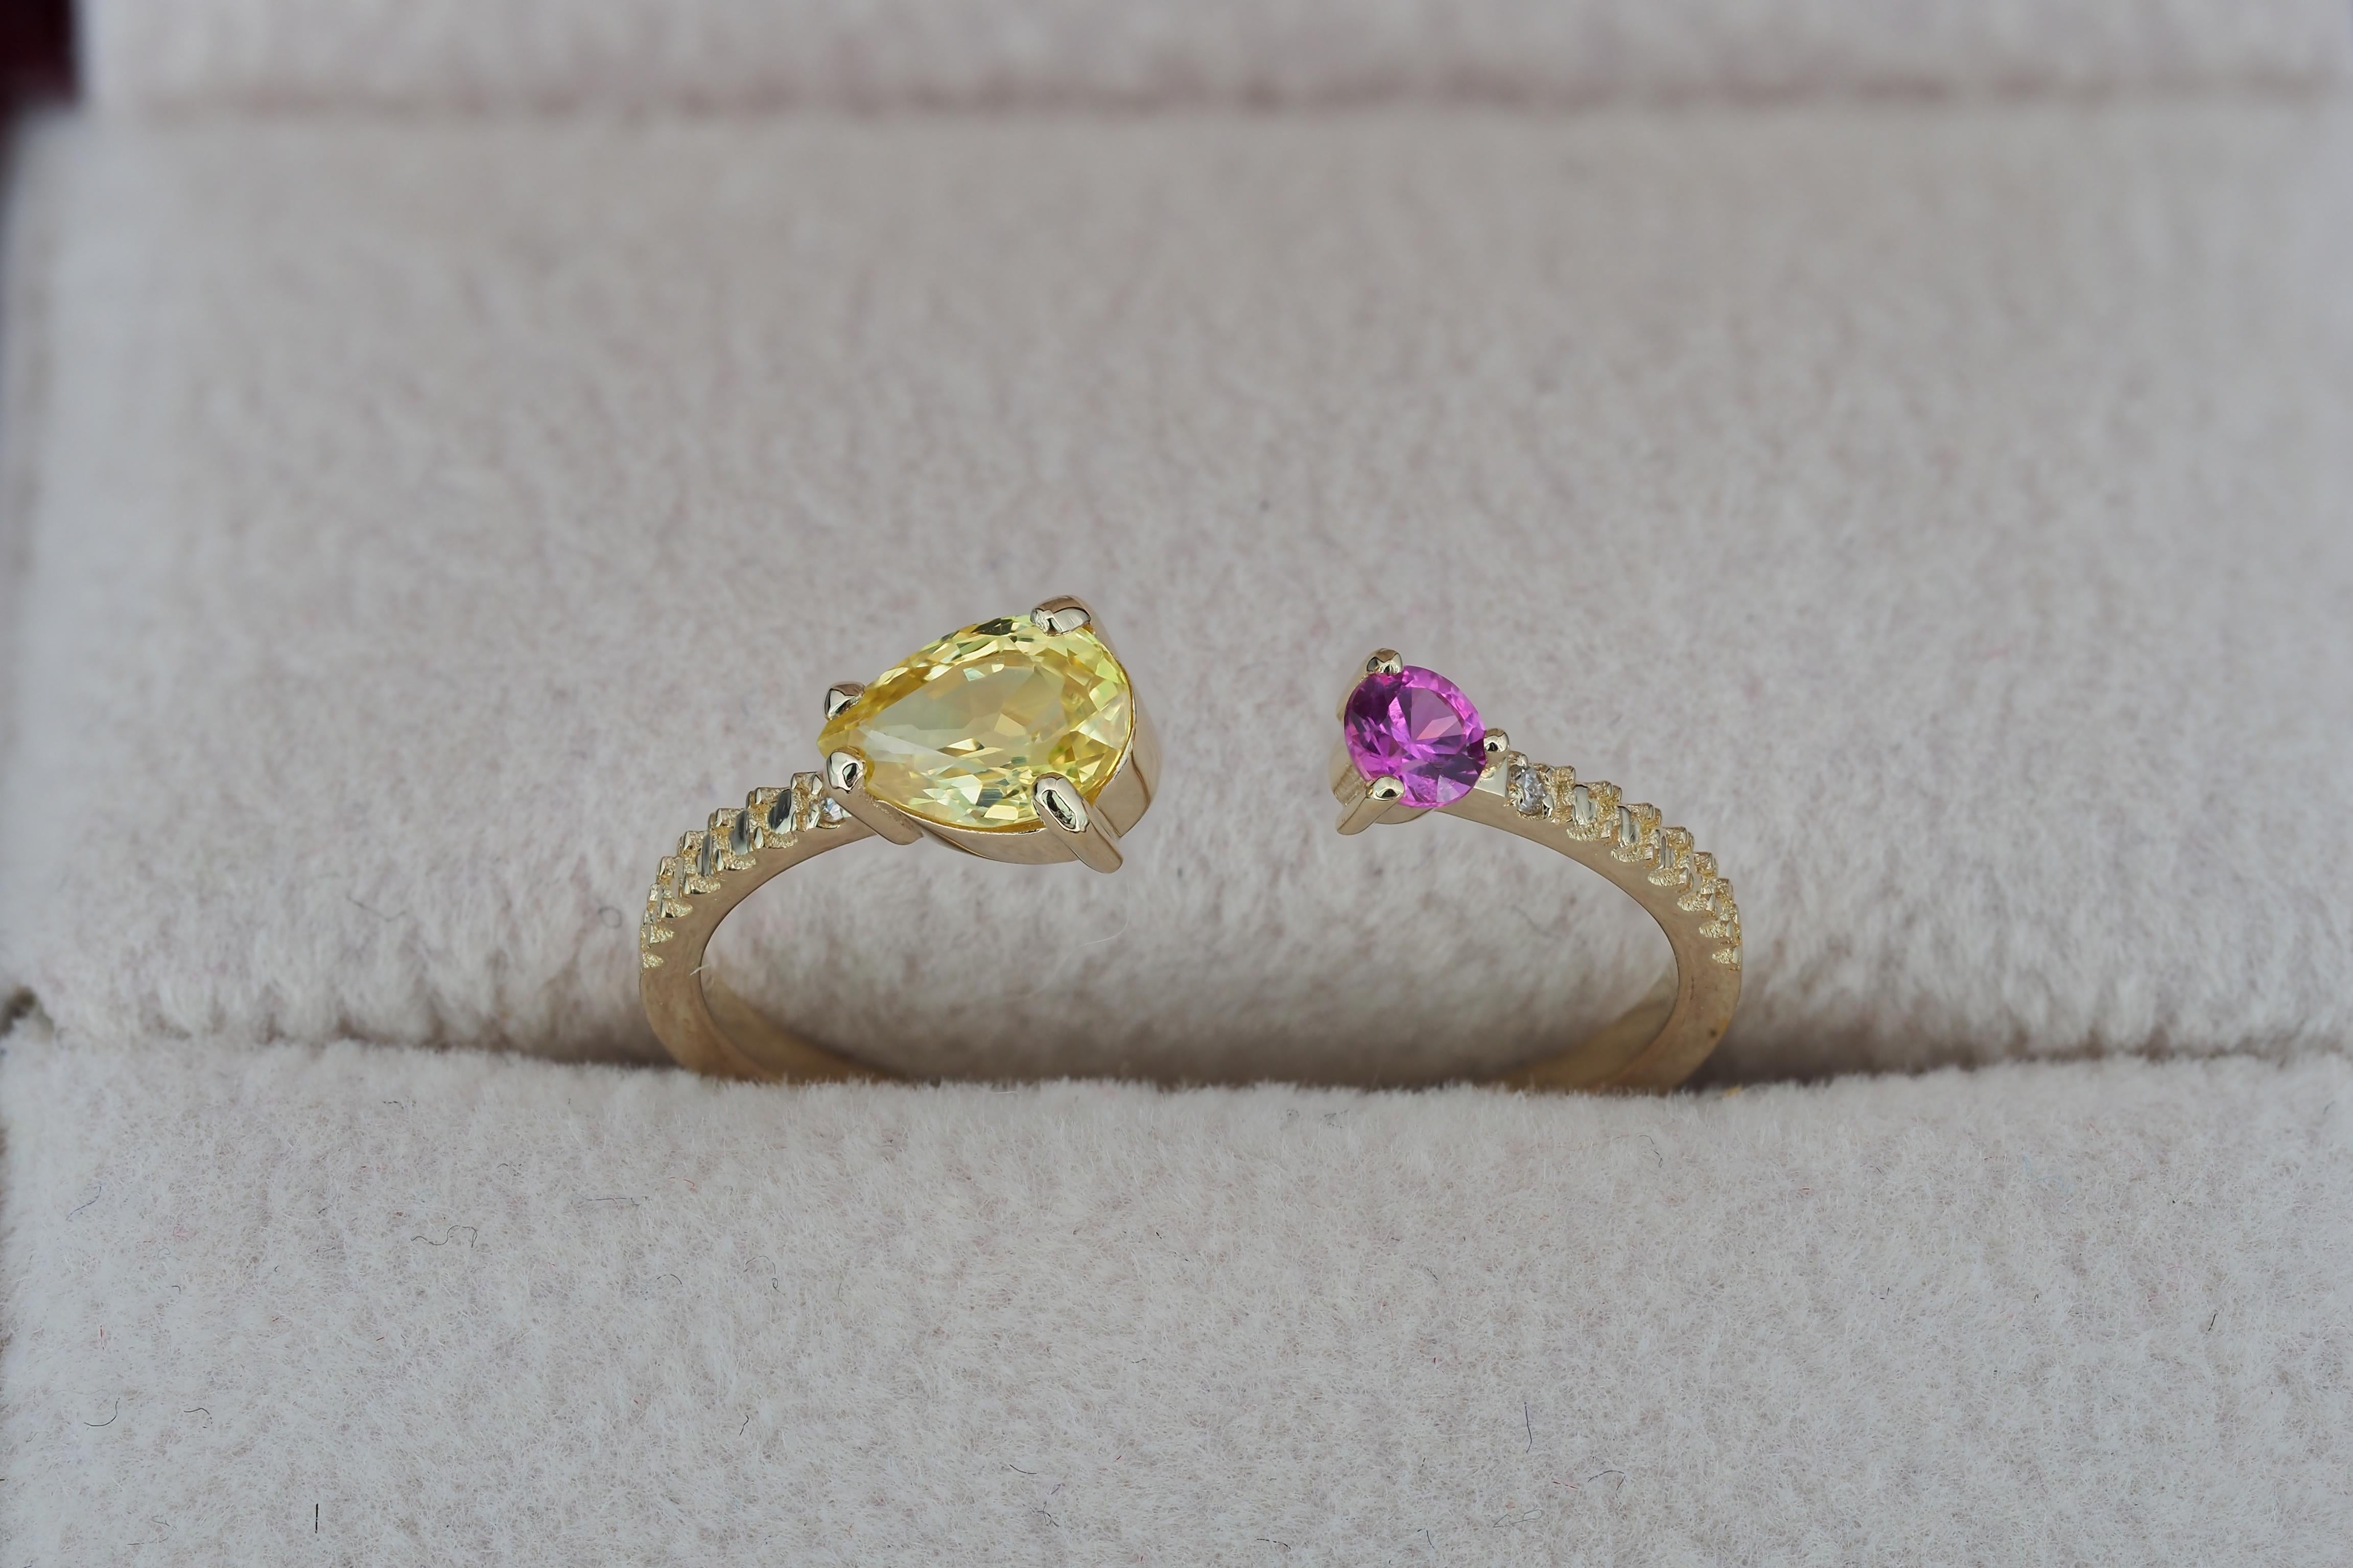 For Sale:  Open ended ring with yellow and pink sapphires 5